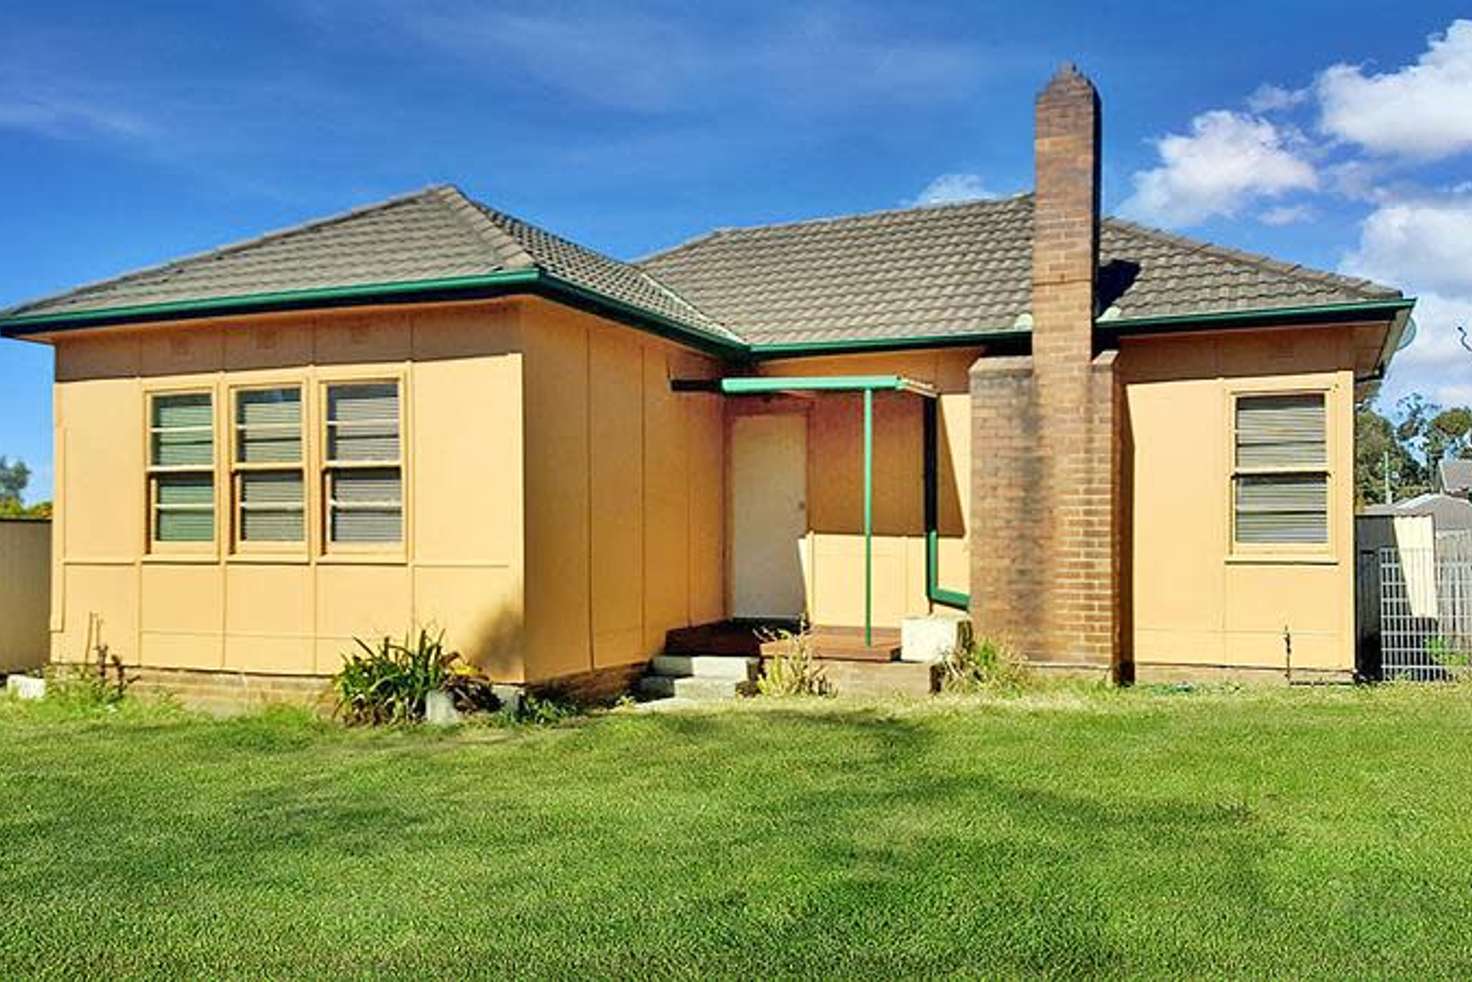 Main view of Homely house listing, 115 Waldron Rd, Chester Hill NSW 2162